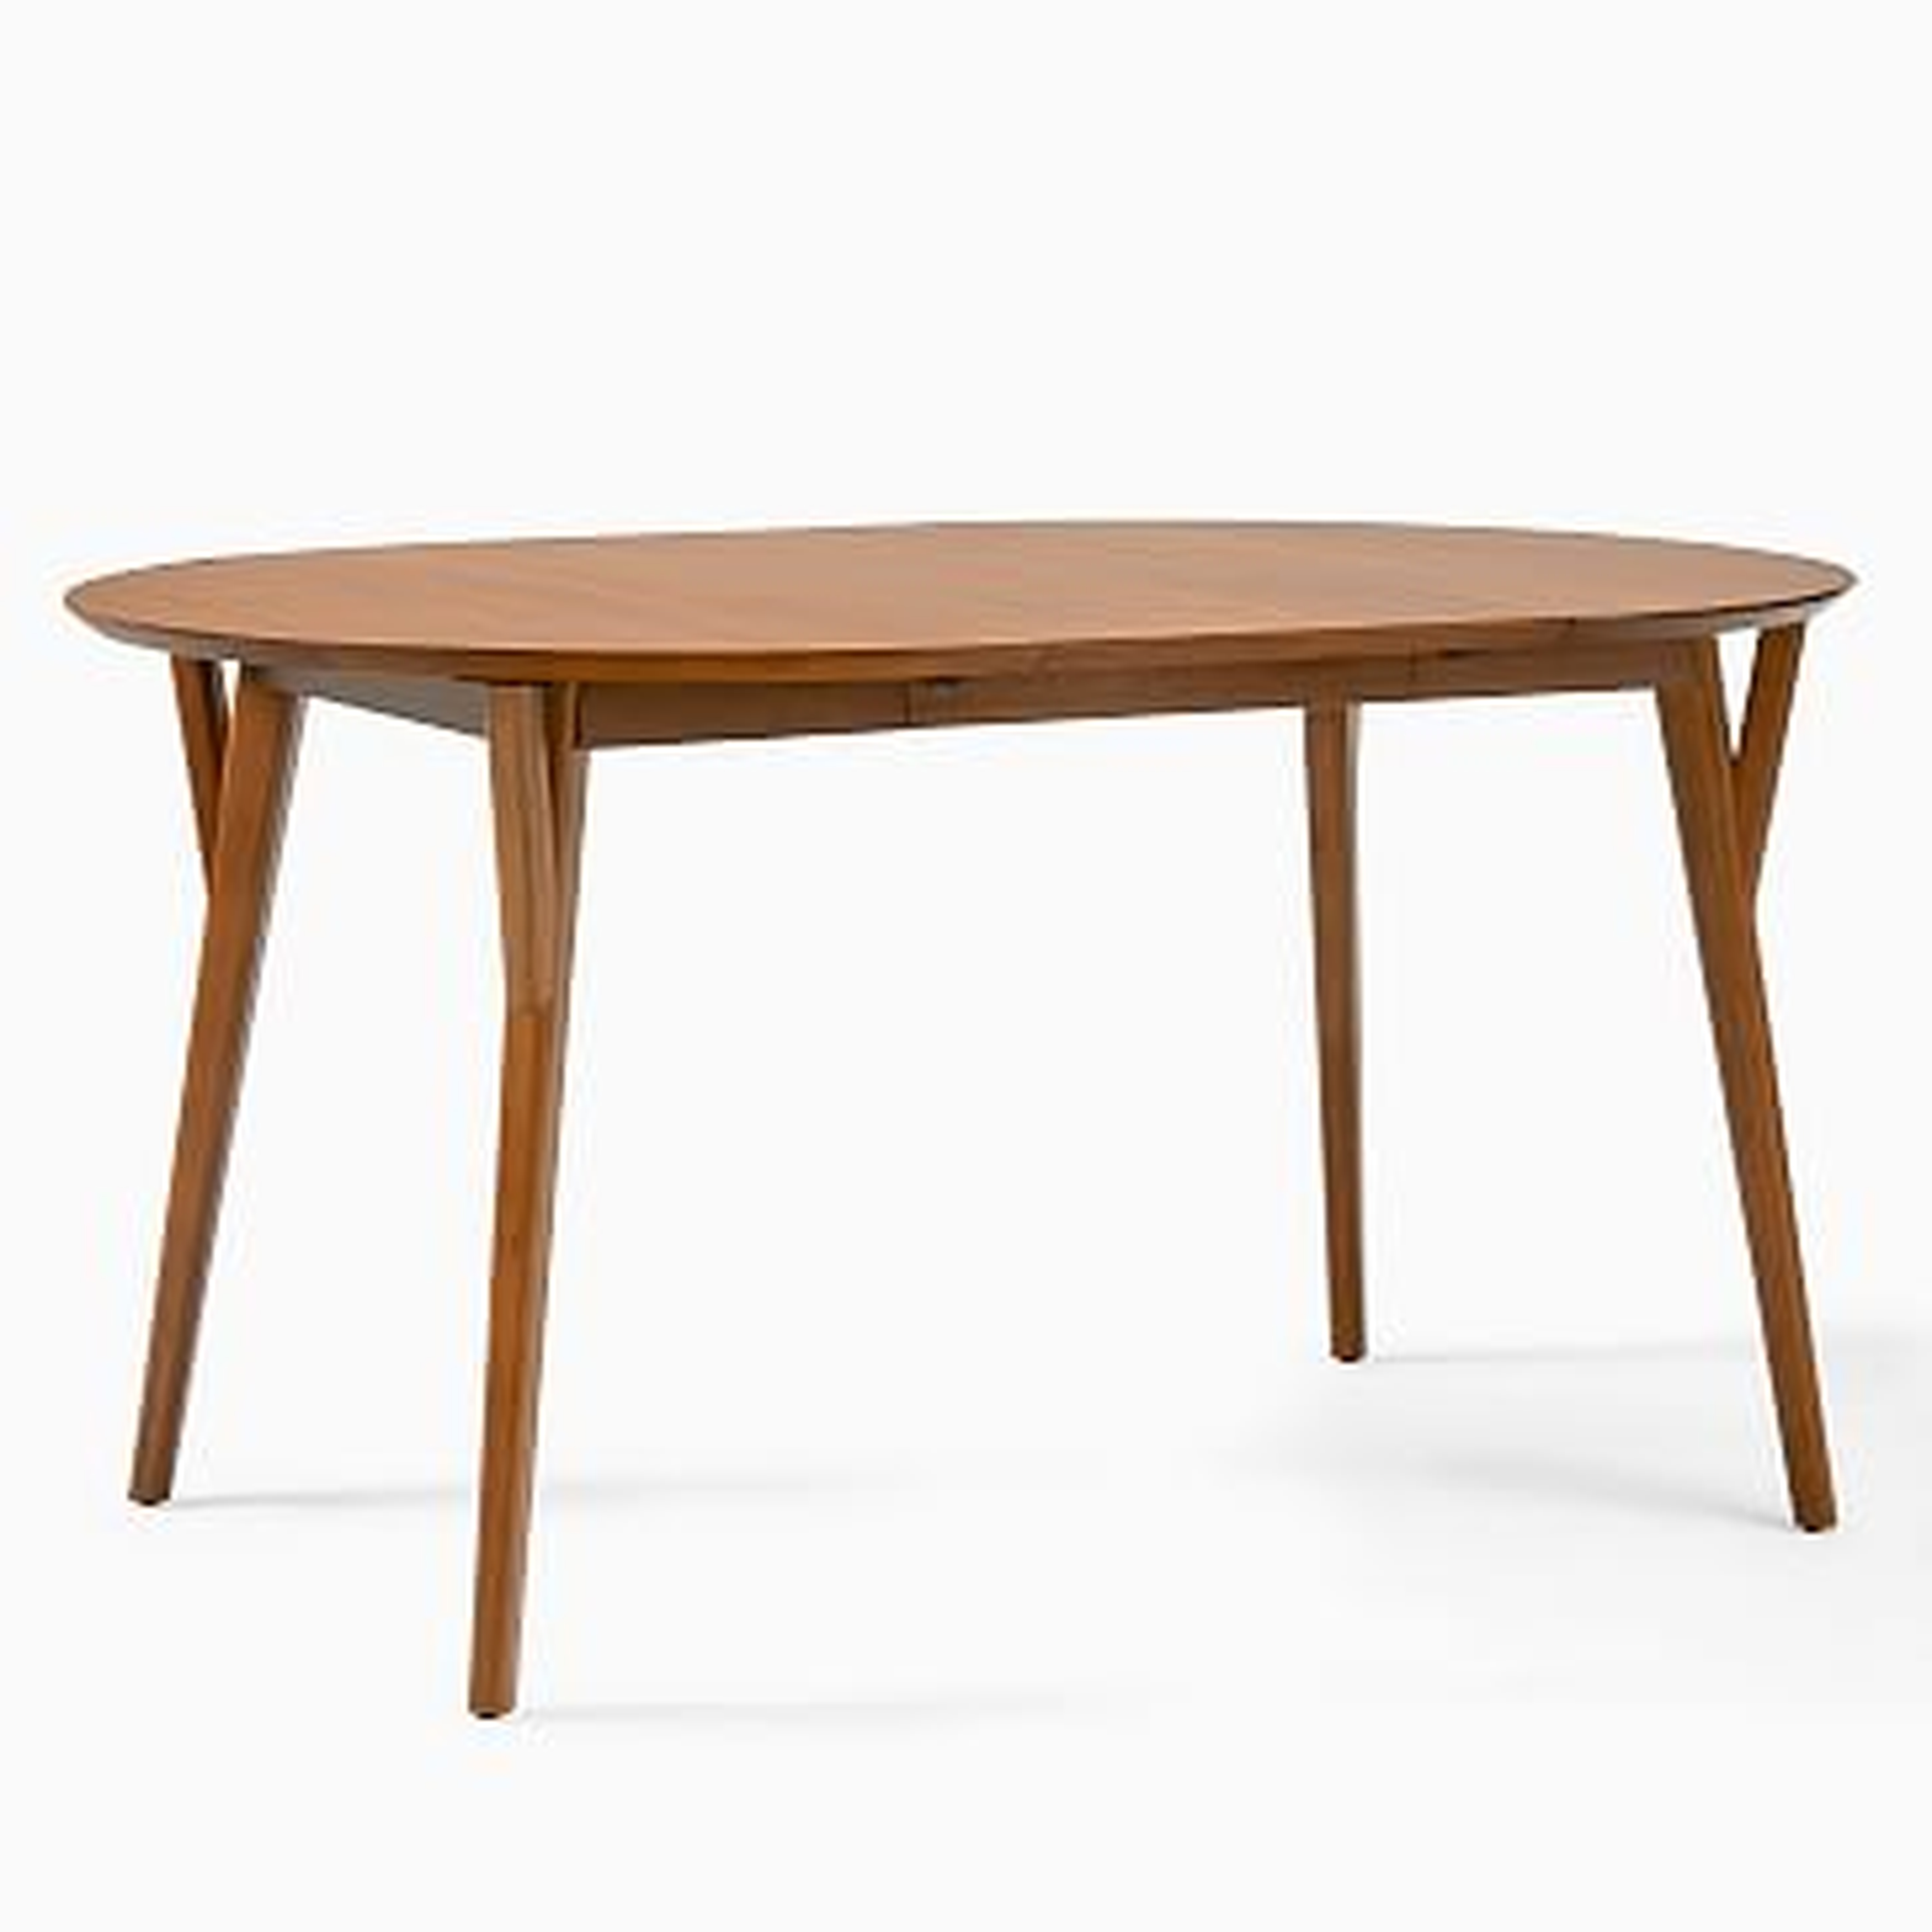 Mid-Century Dining Table, 60" - 80" Oval Expandable, Walnut - West Elm